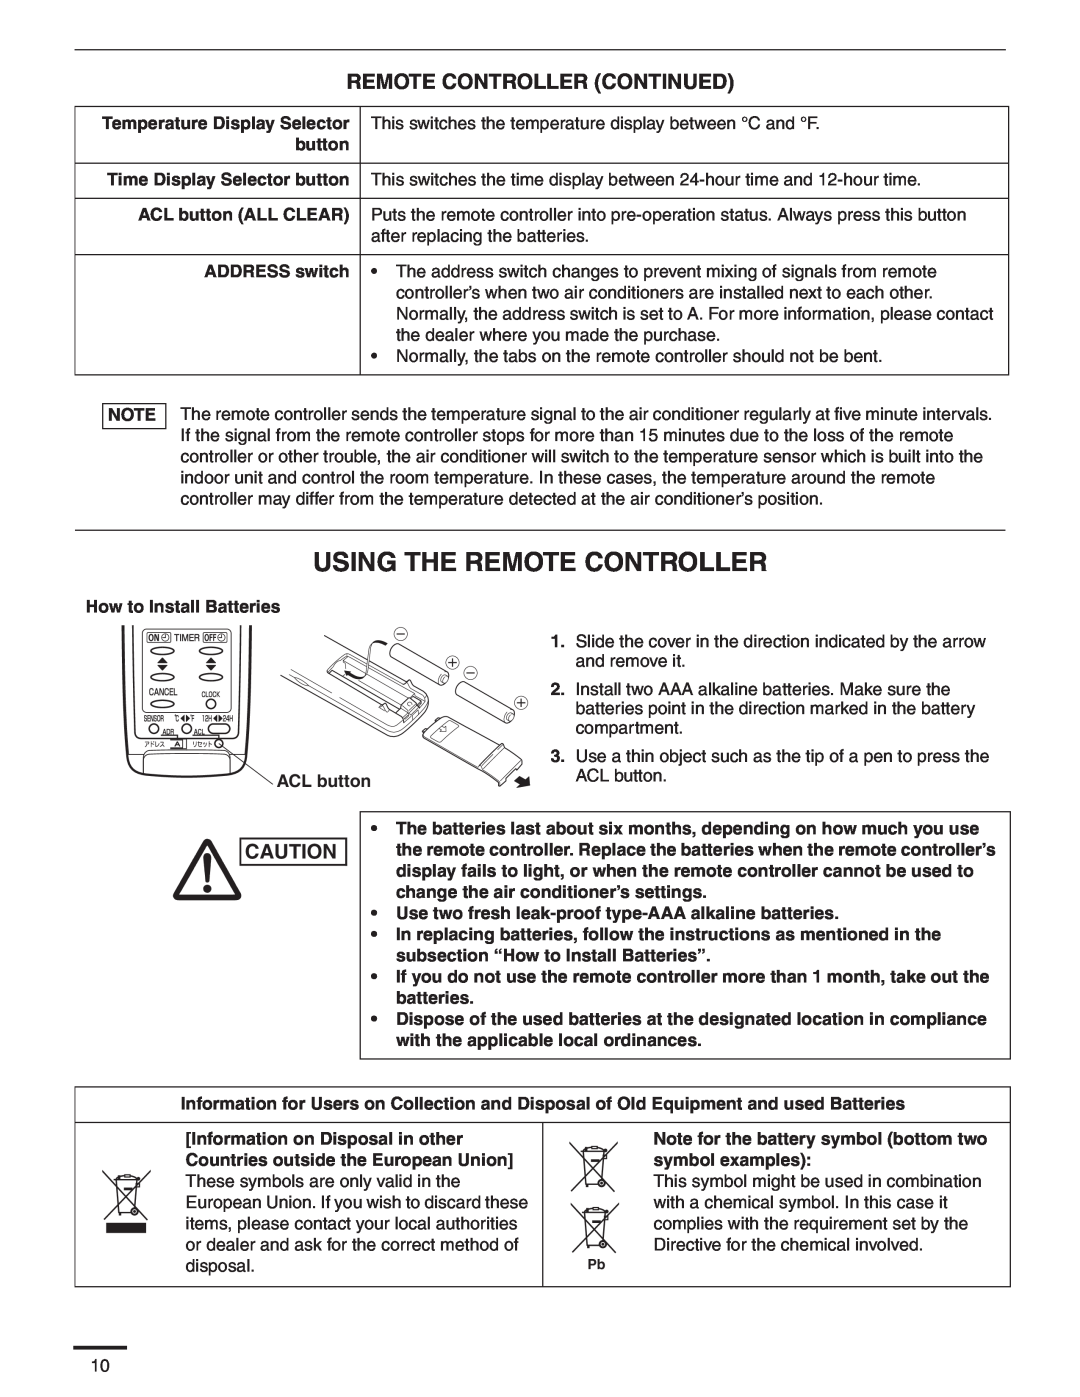 Panasonic CS-MKS18NKU, CS-MKS24NKU, CS-MKS9NKU service manual Using The Remote Controller, Remote Controller Continued 